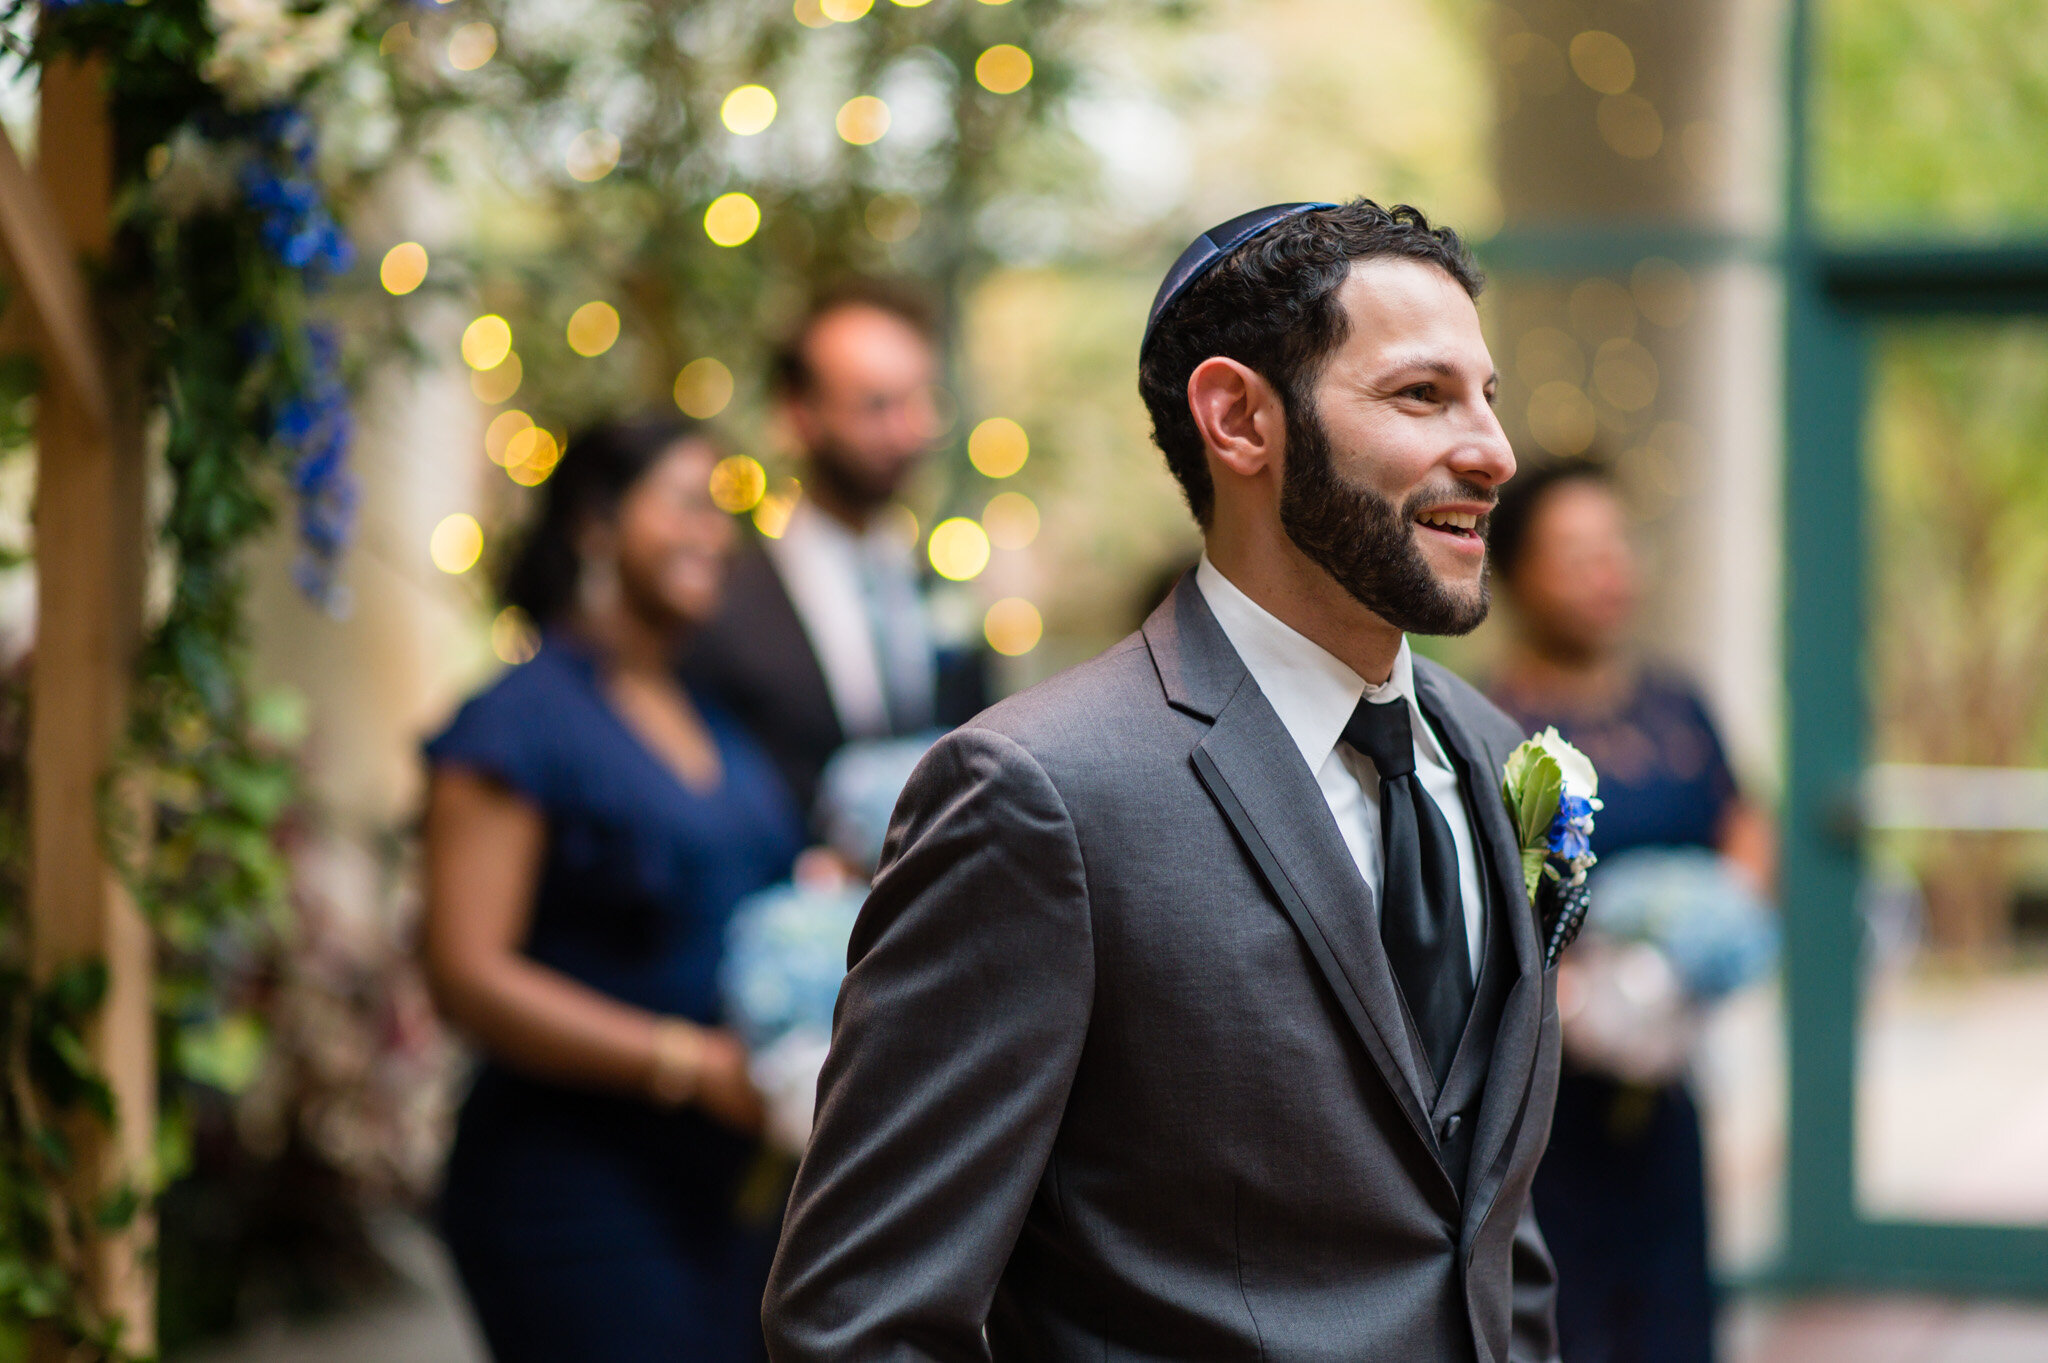 The groom's reaction to seeing his bride walk down the aisle at Meadowlark Gardens